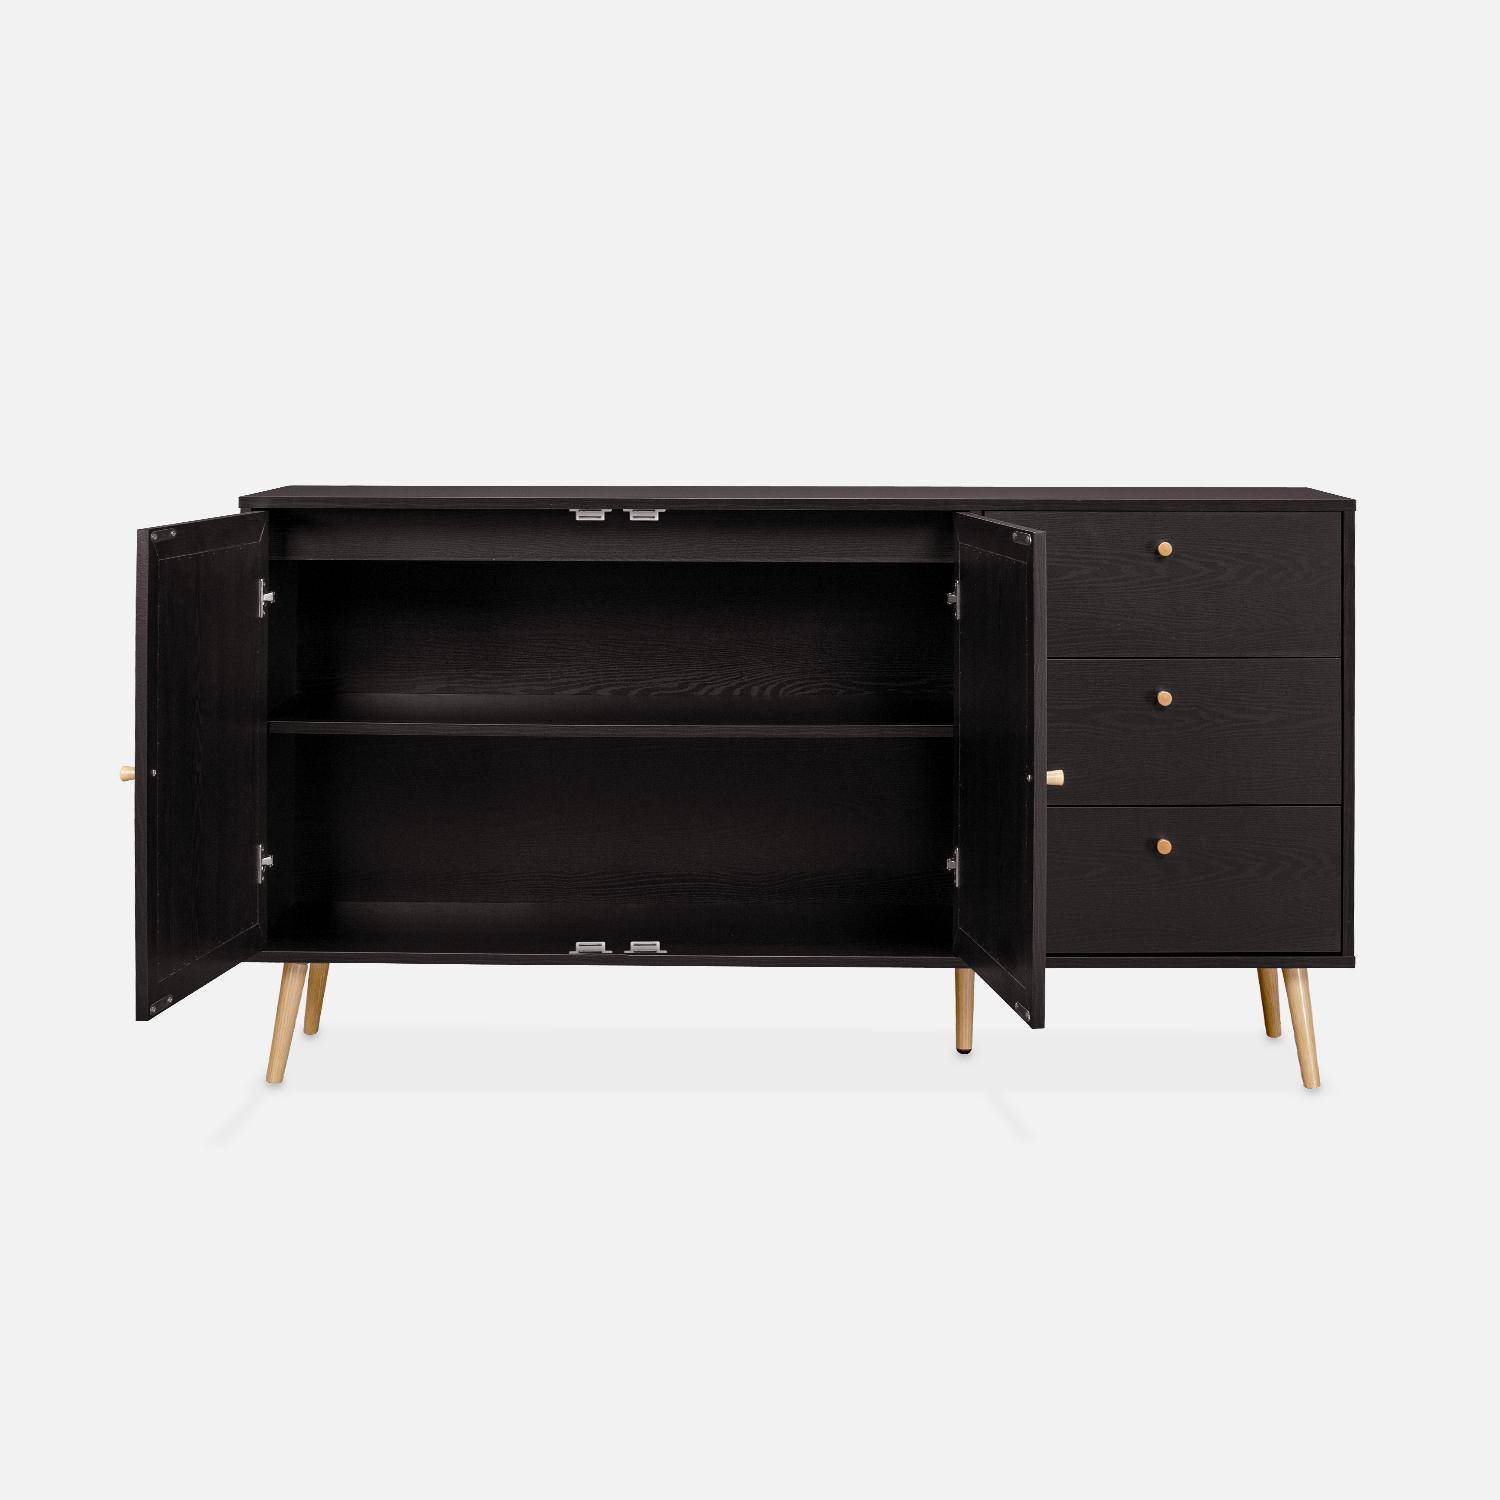 Wood and cane rattan detail sideboard, 2 doors & 3 drawers, Black , L150xW39xH79cm  Photo5